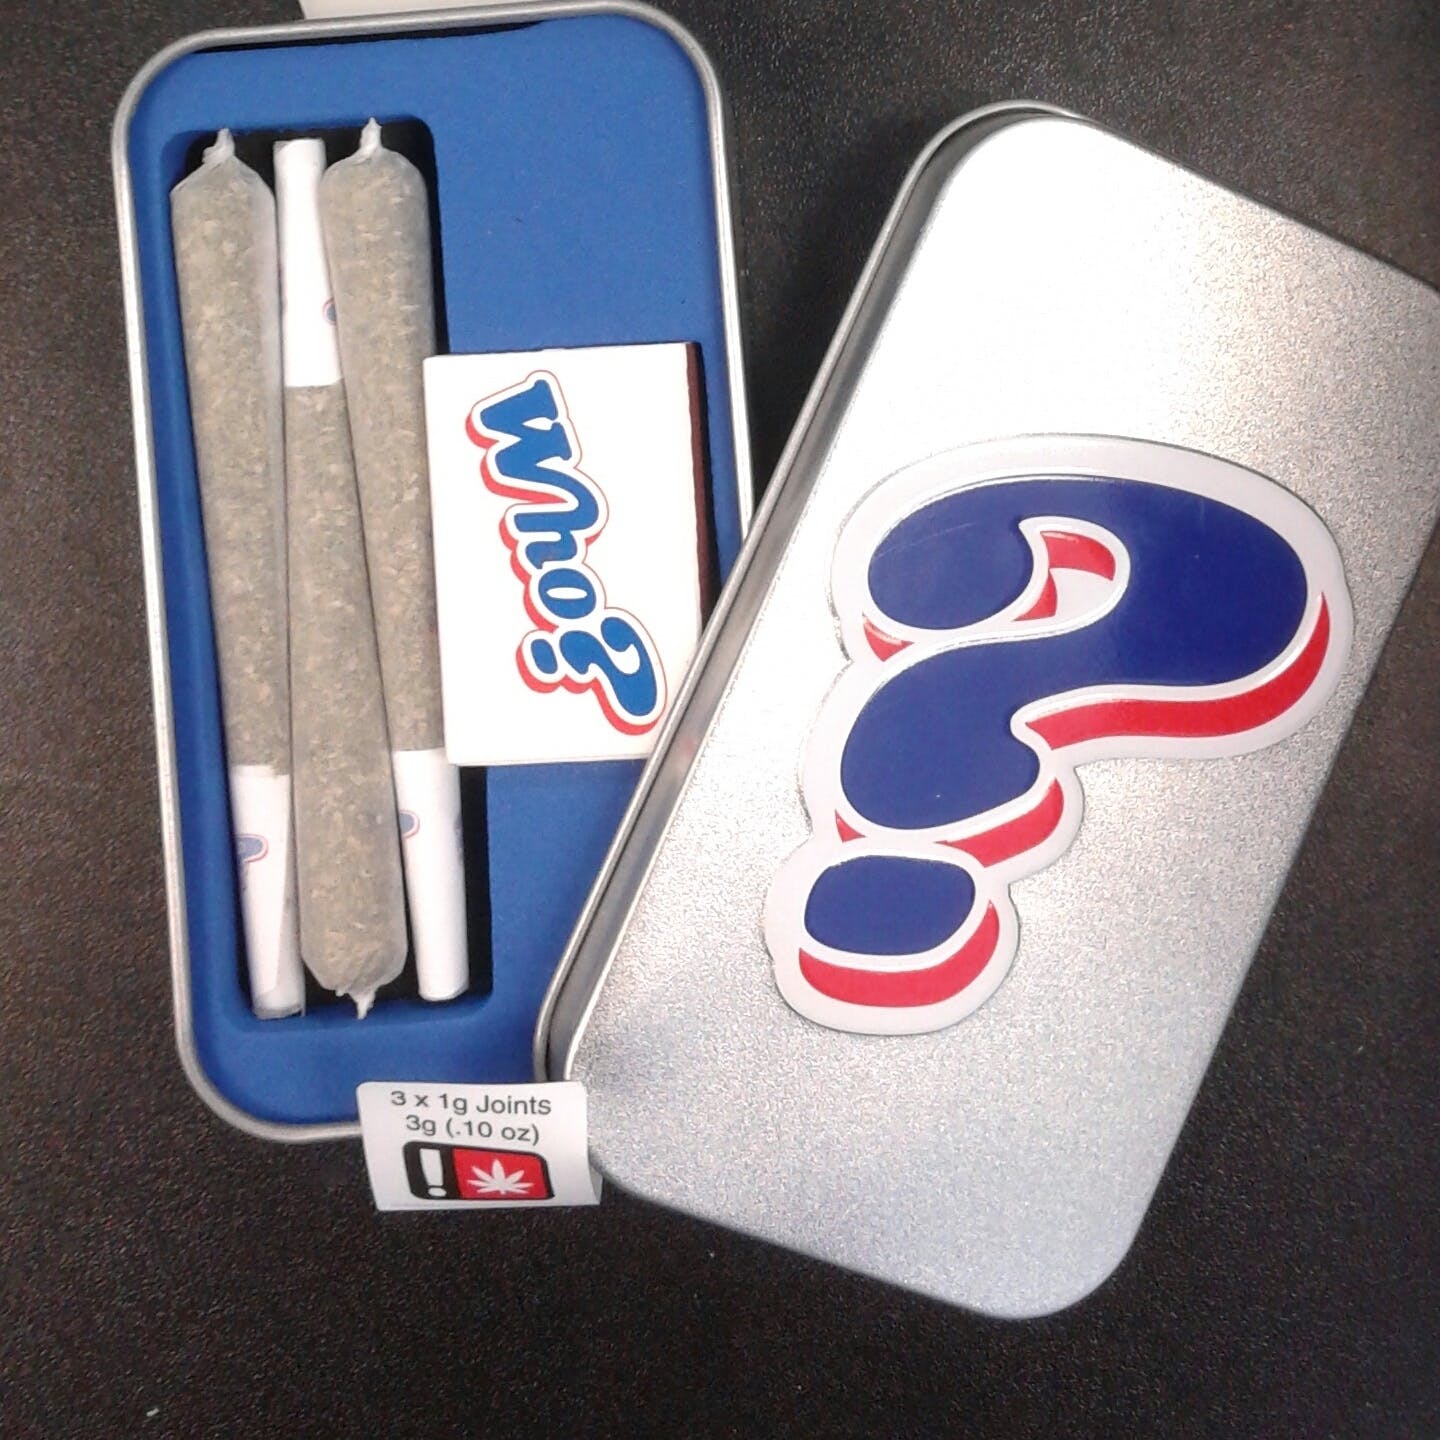 WHO - 1g Joint Kit